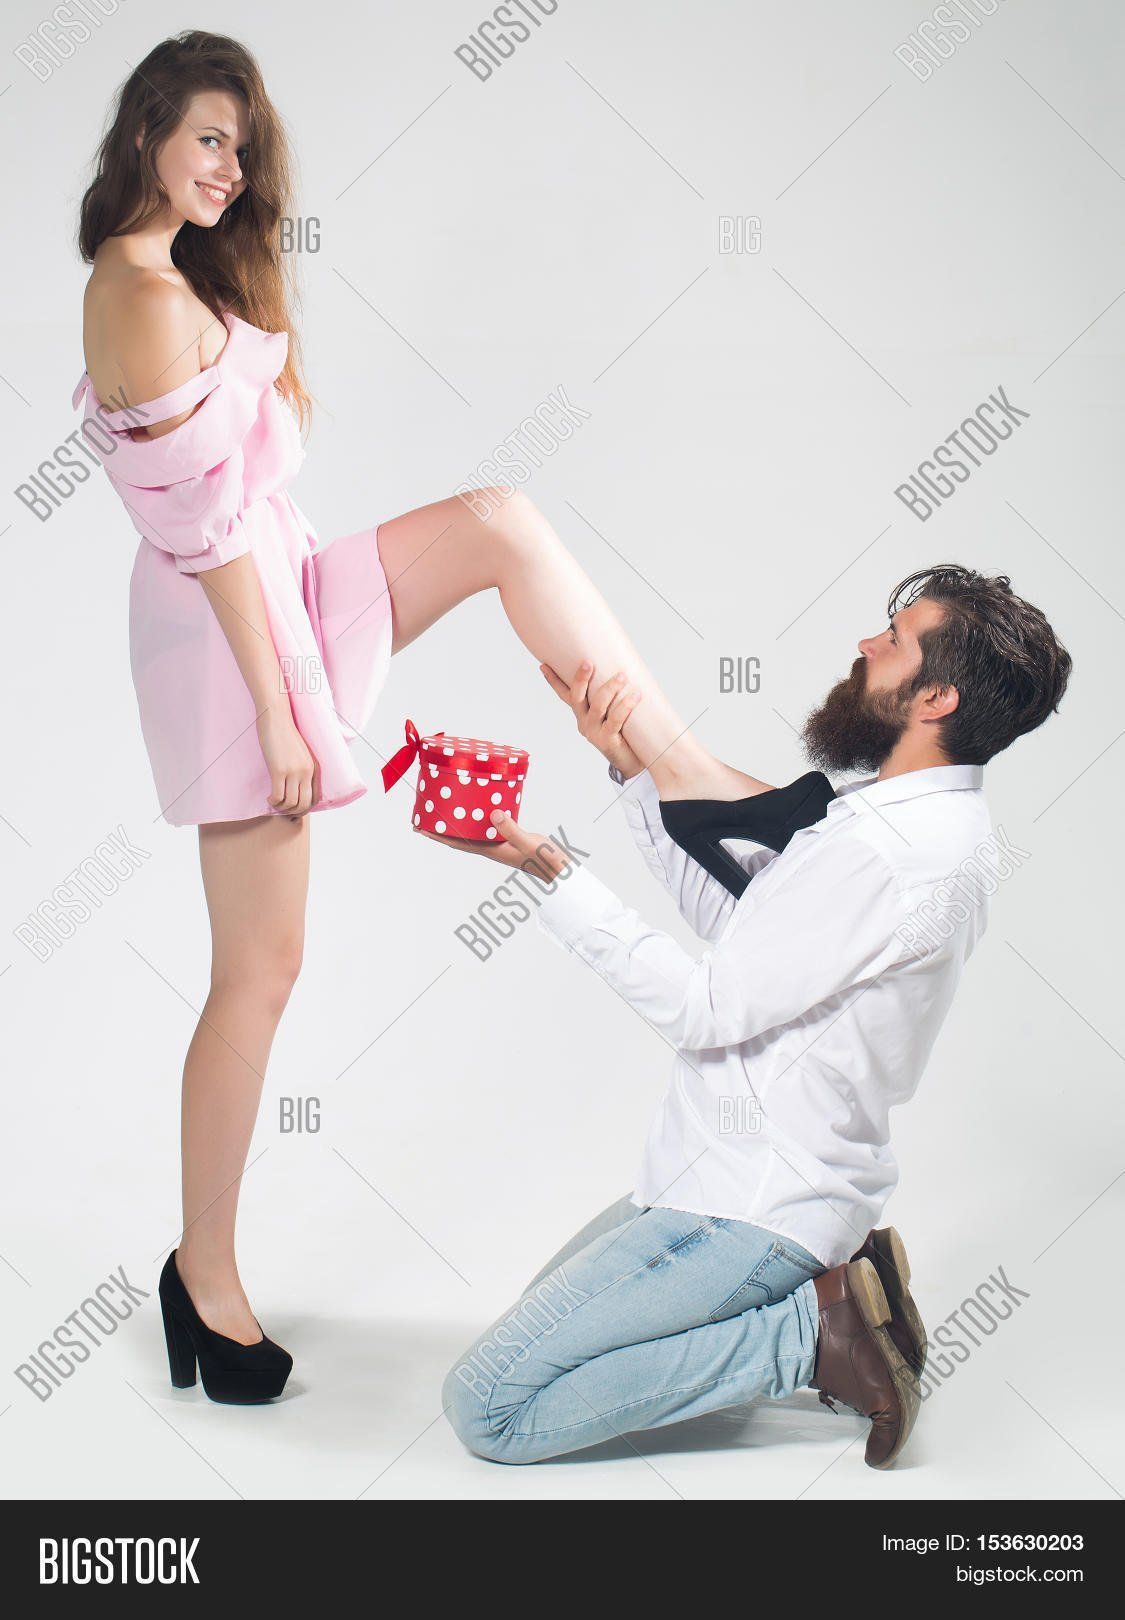 best of Sexy pic Boy holding girl